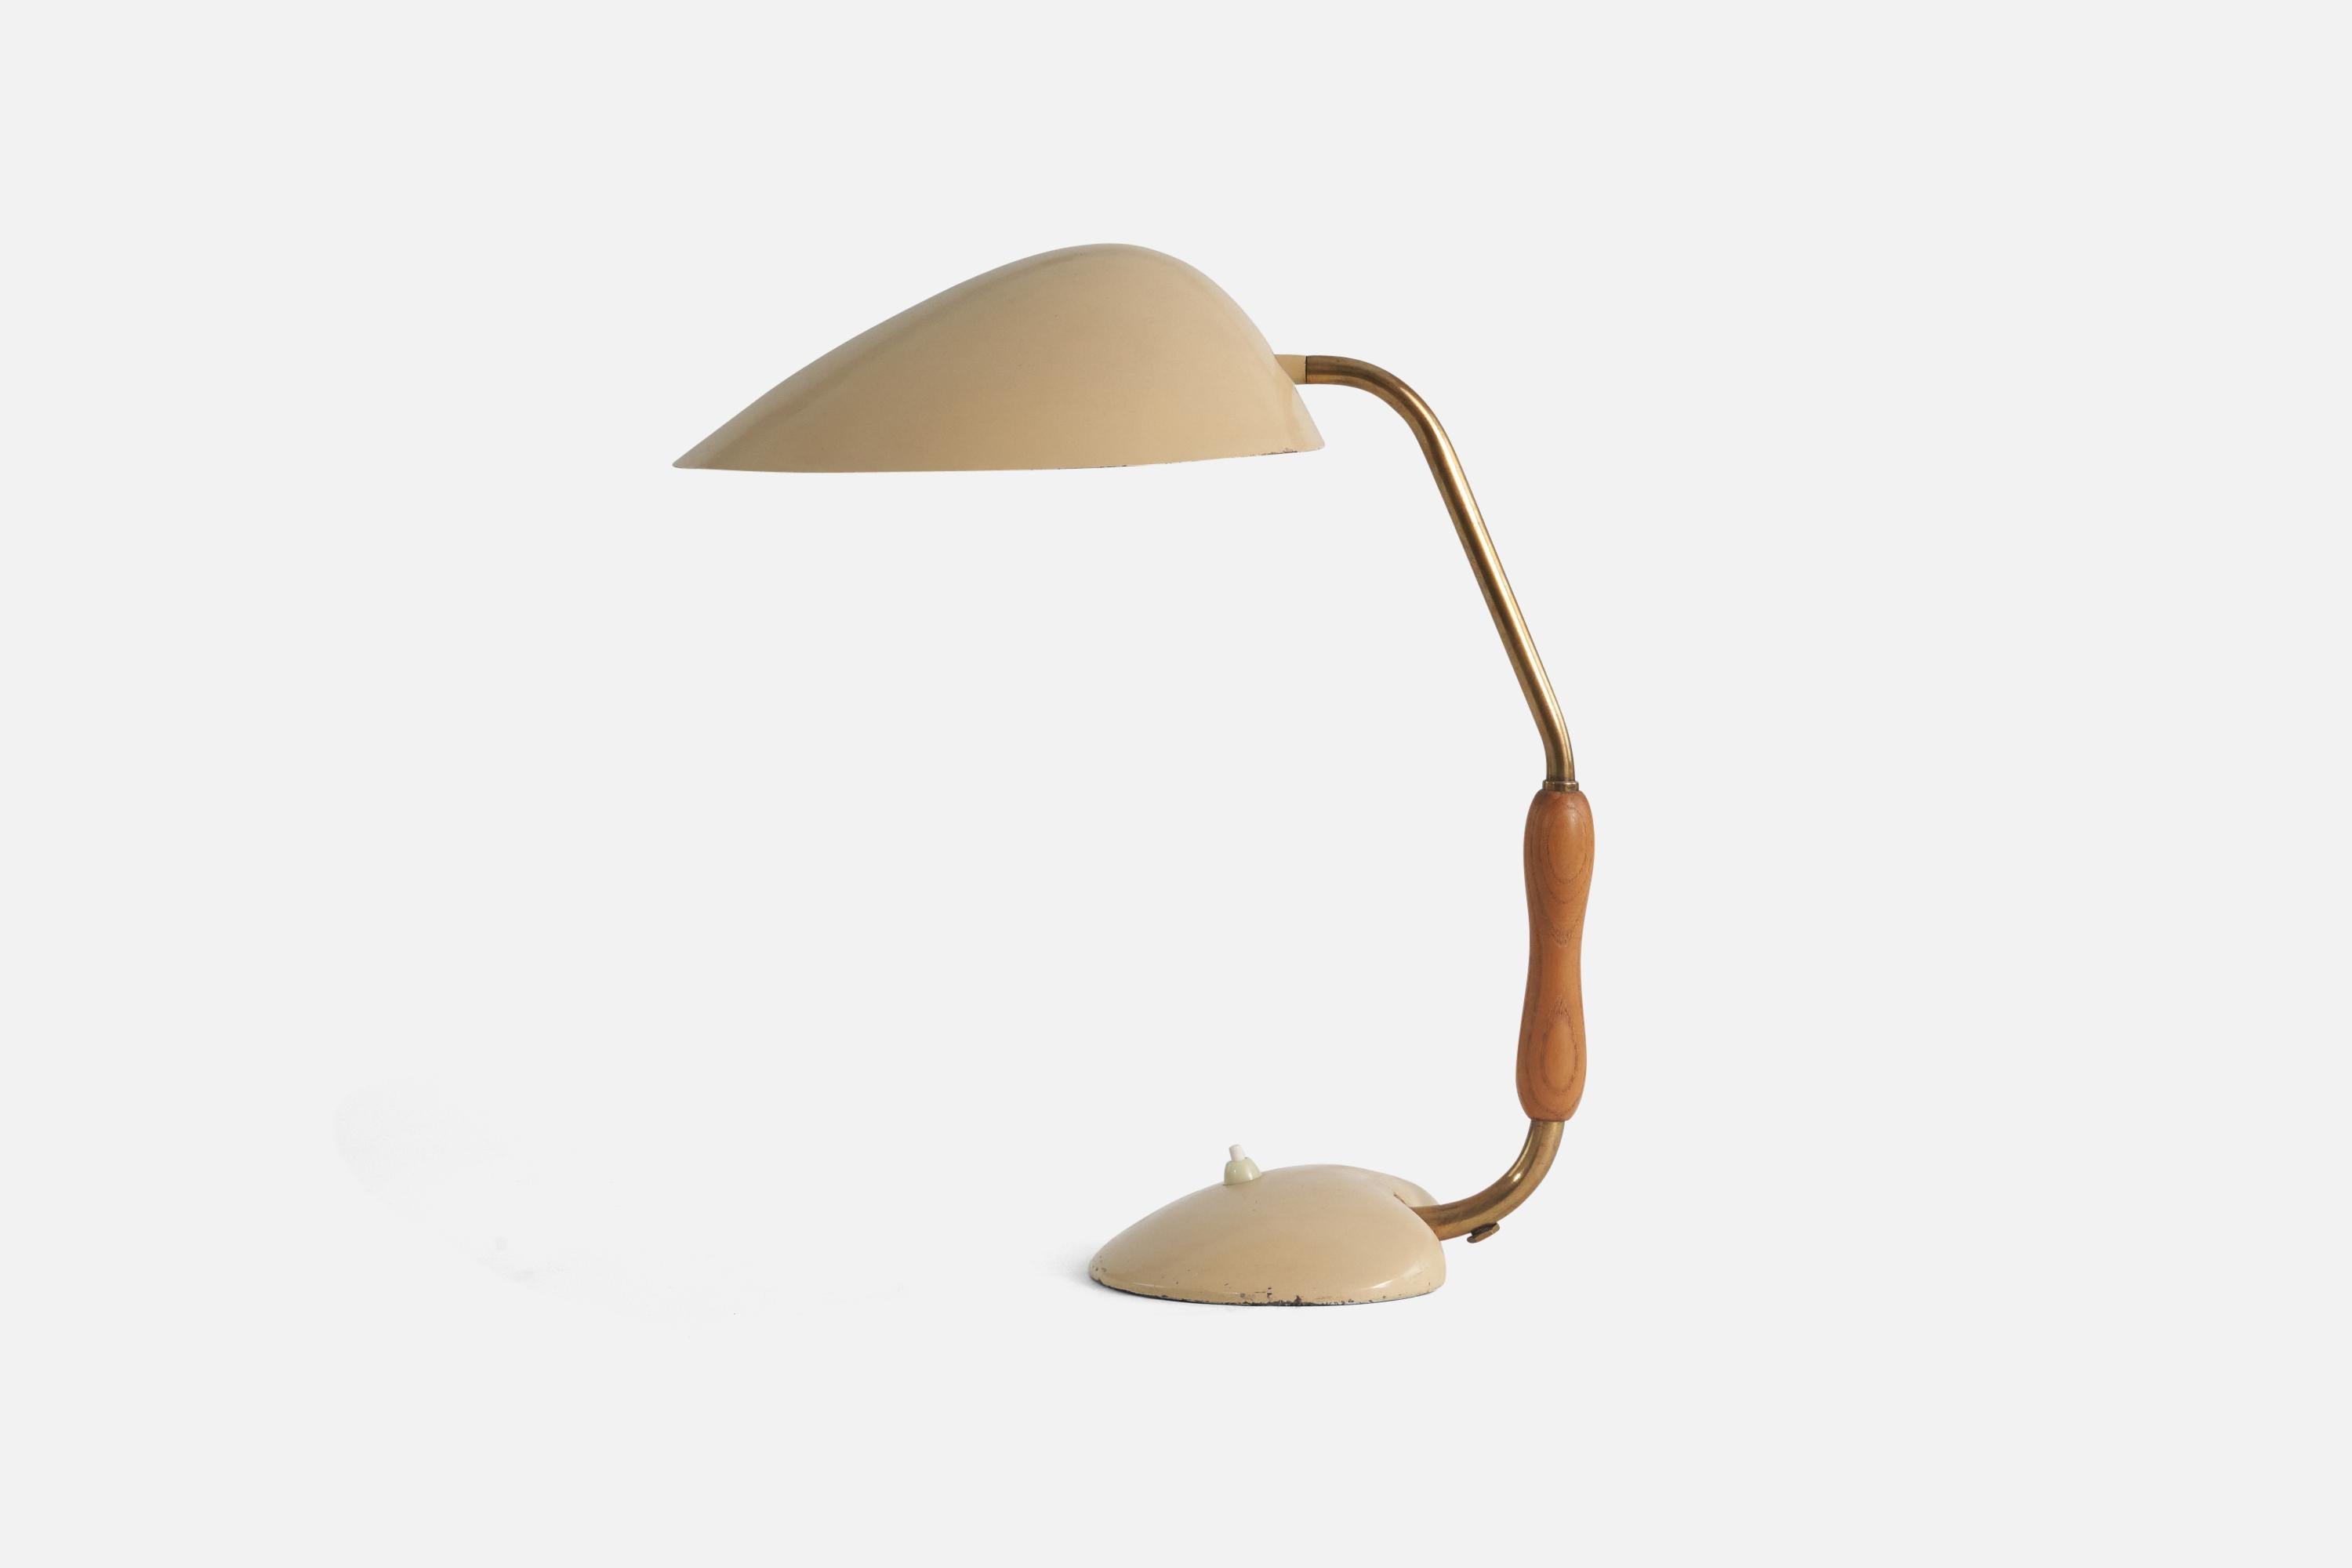 A beige-lacquered metal, brass and oak table lamp designed and produced in Sweden, late 1940s. 

Socket takes standard E-26 medium base bulb.
There is no maximum wattage stated on the fixture.